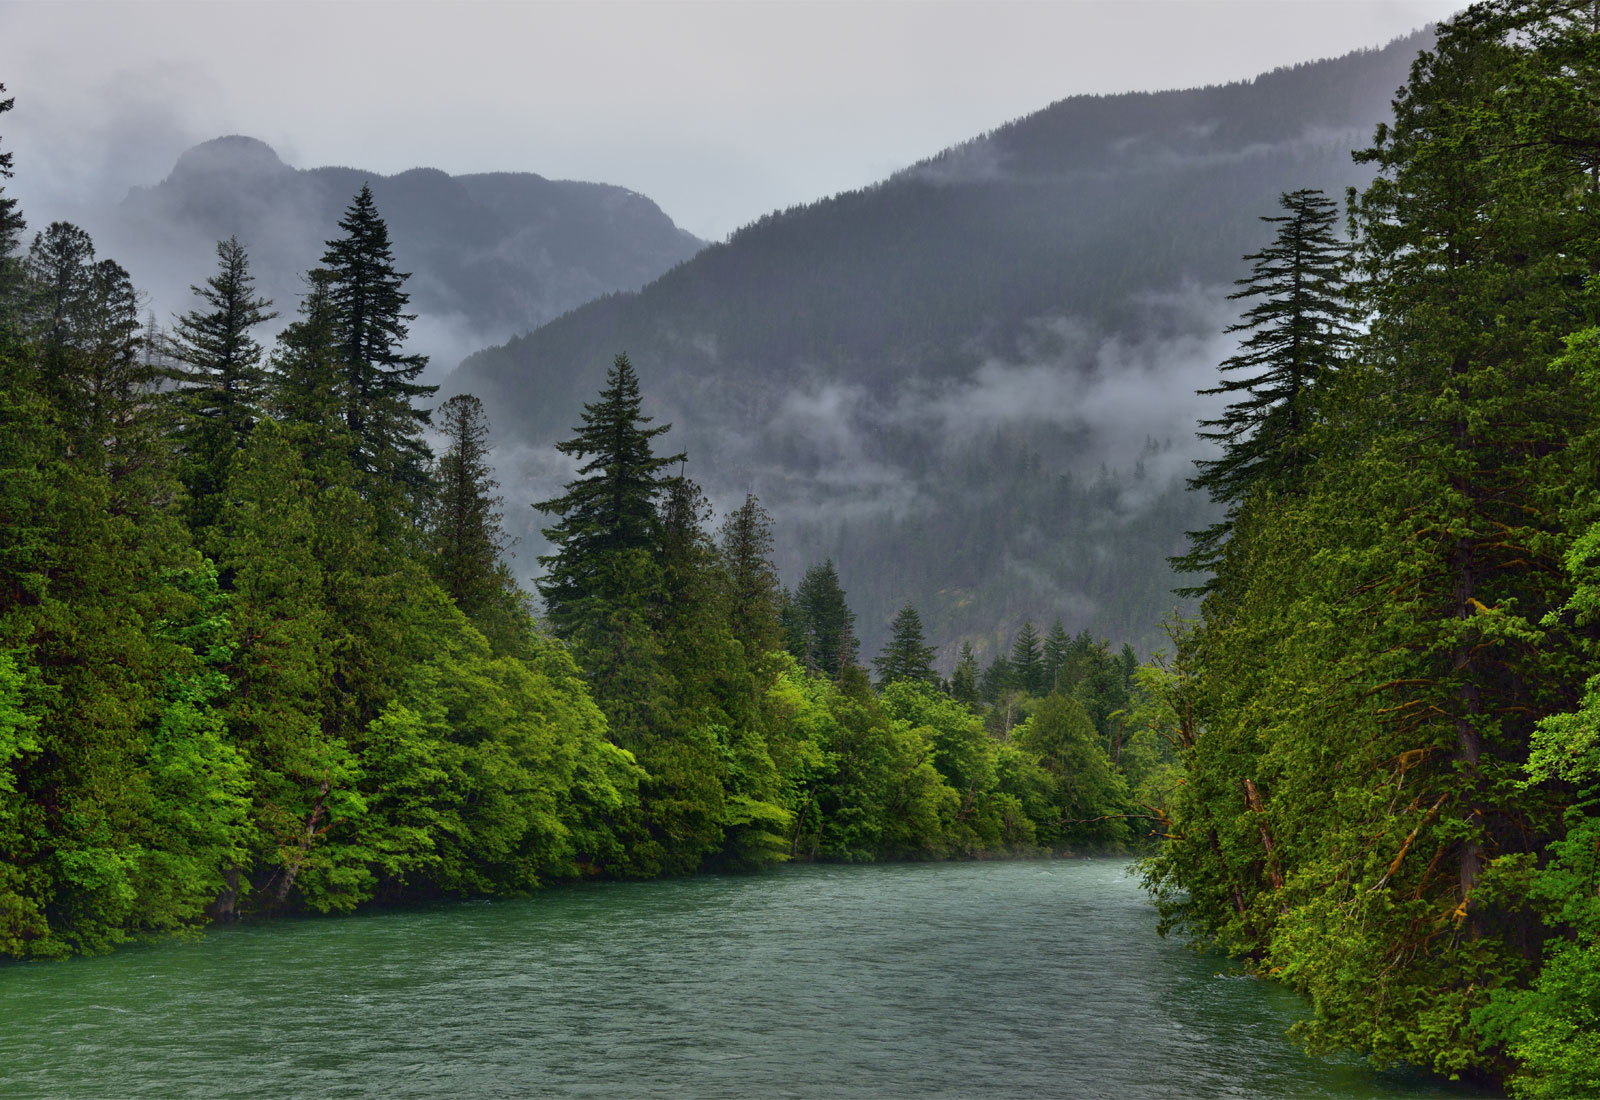 A river, pine trees, and mountains covered in mist